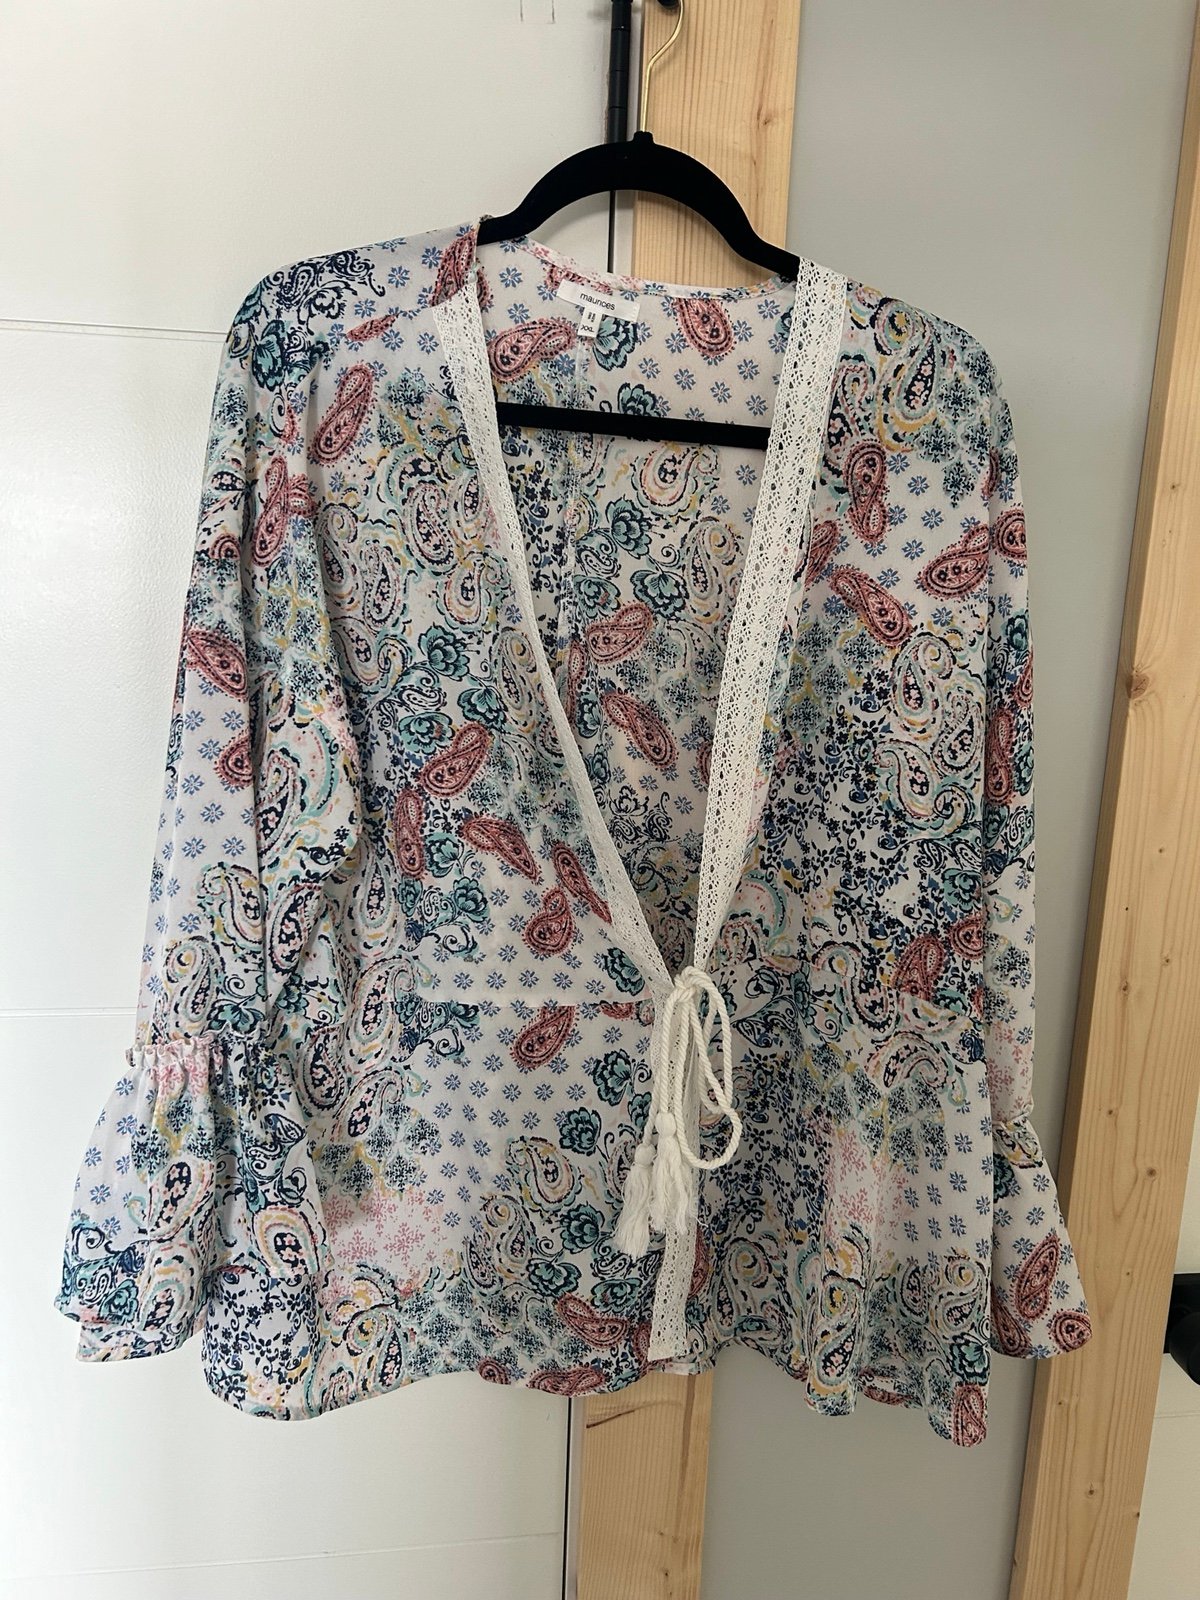 Authentic Maurices cardigan gmdYXTXit Outlet Store